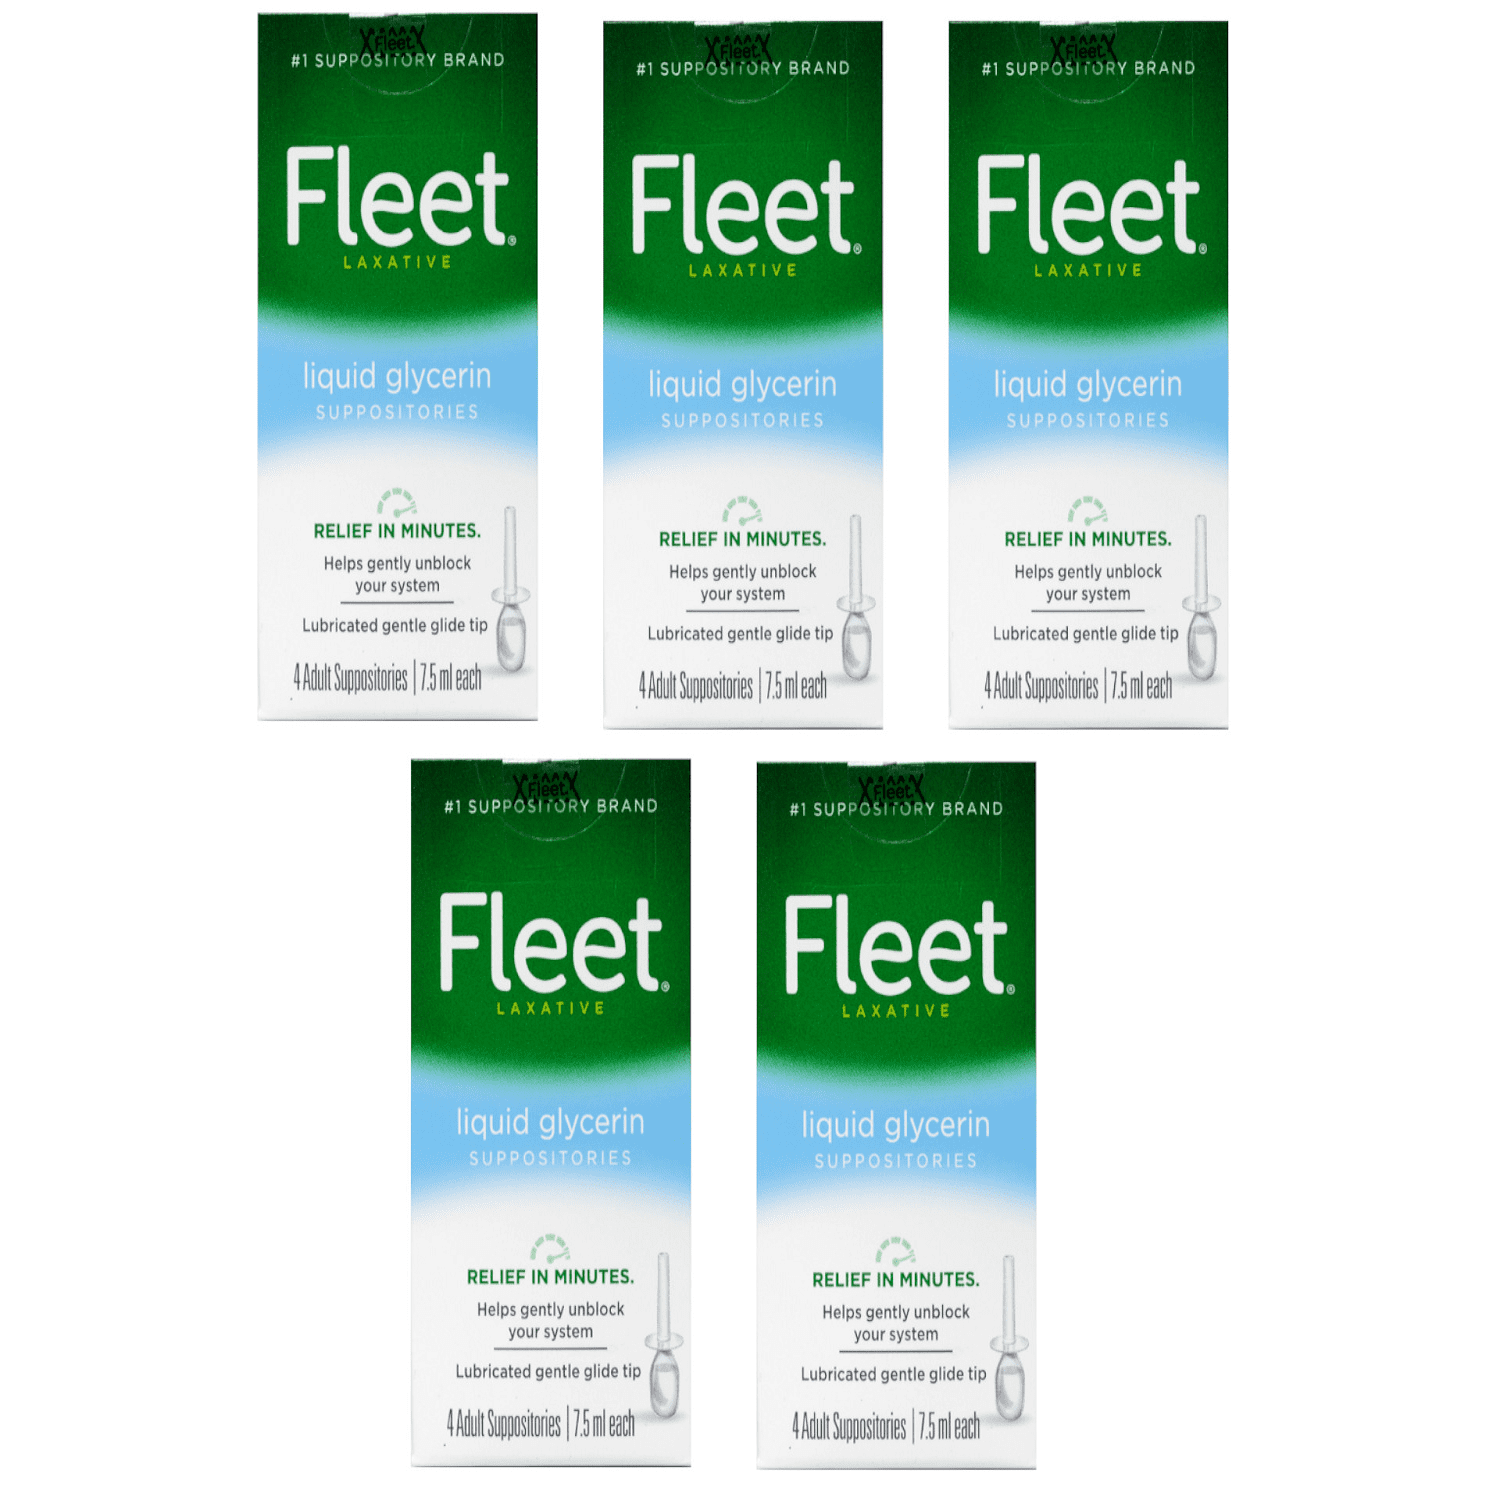 Fleet Suppositories, Liquid Glycerin, Laxative, Adult, 4 Pack - 4 pack, 7.5 ml suppositories